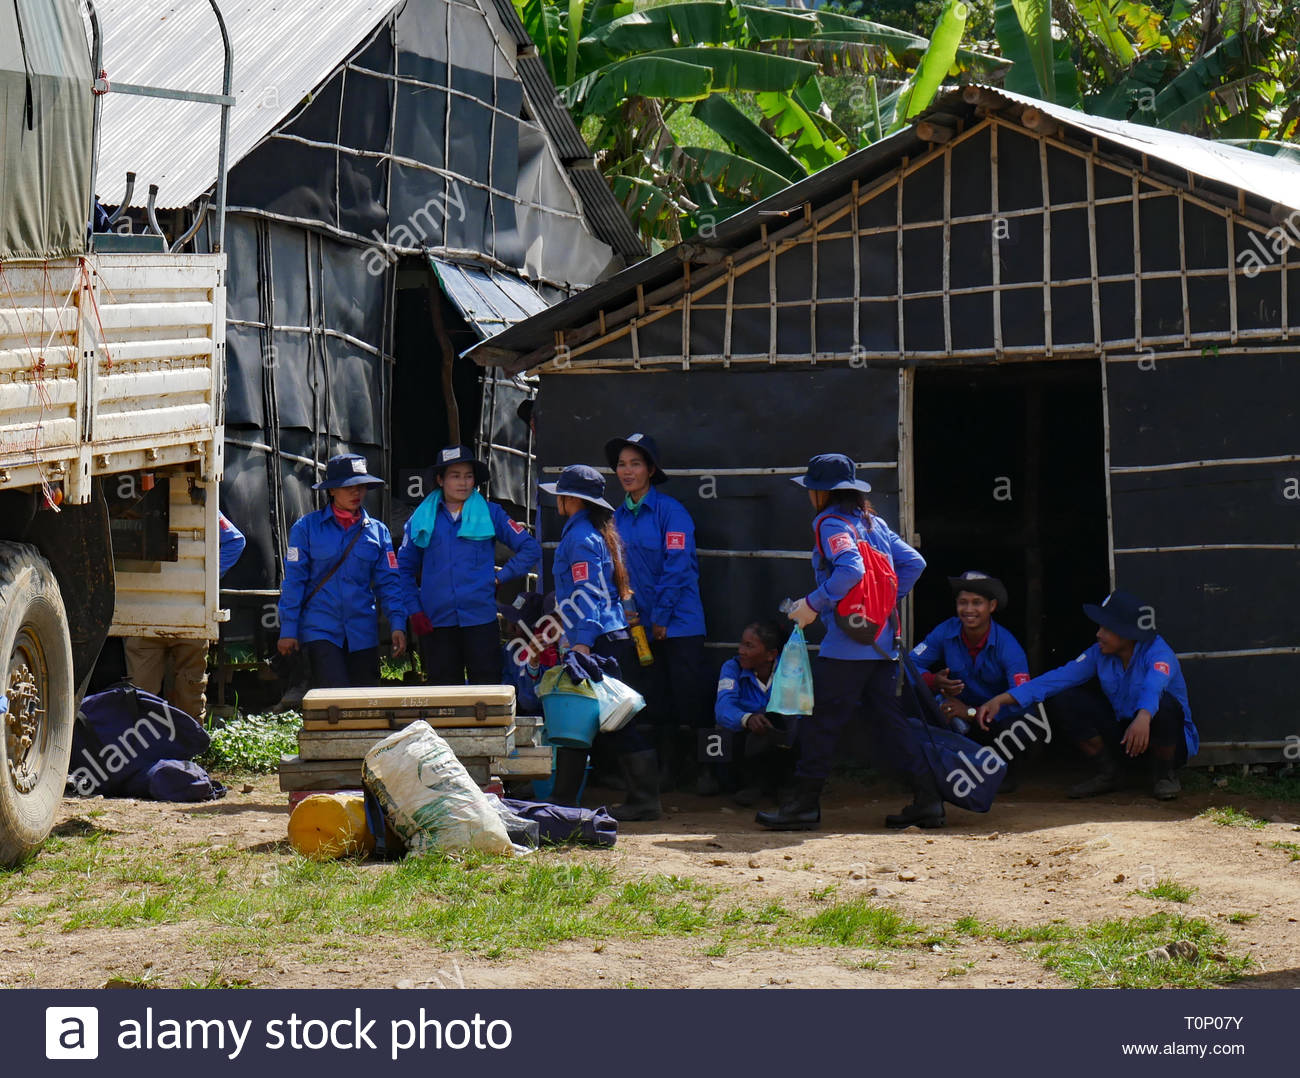 Men and women of the “HALO Trust” at base camp prepare for another mission to clear ground of landmines and UXB’s. Pailin, Cambodia. 01-12-2018 Stock Photo